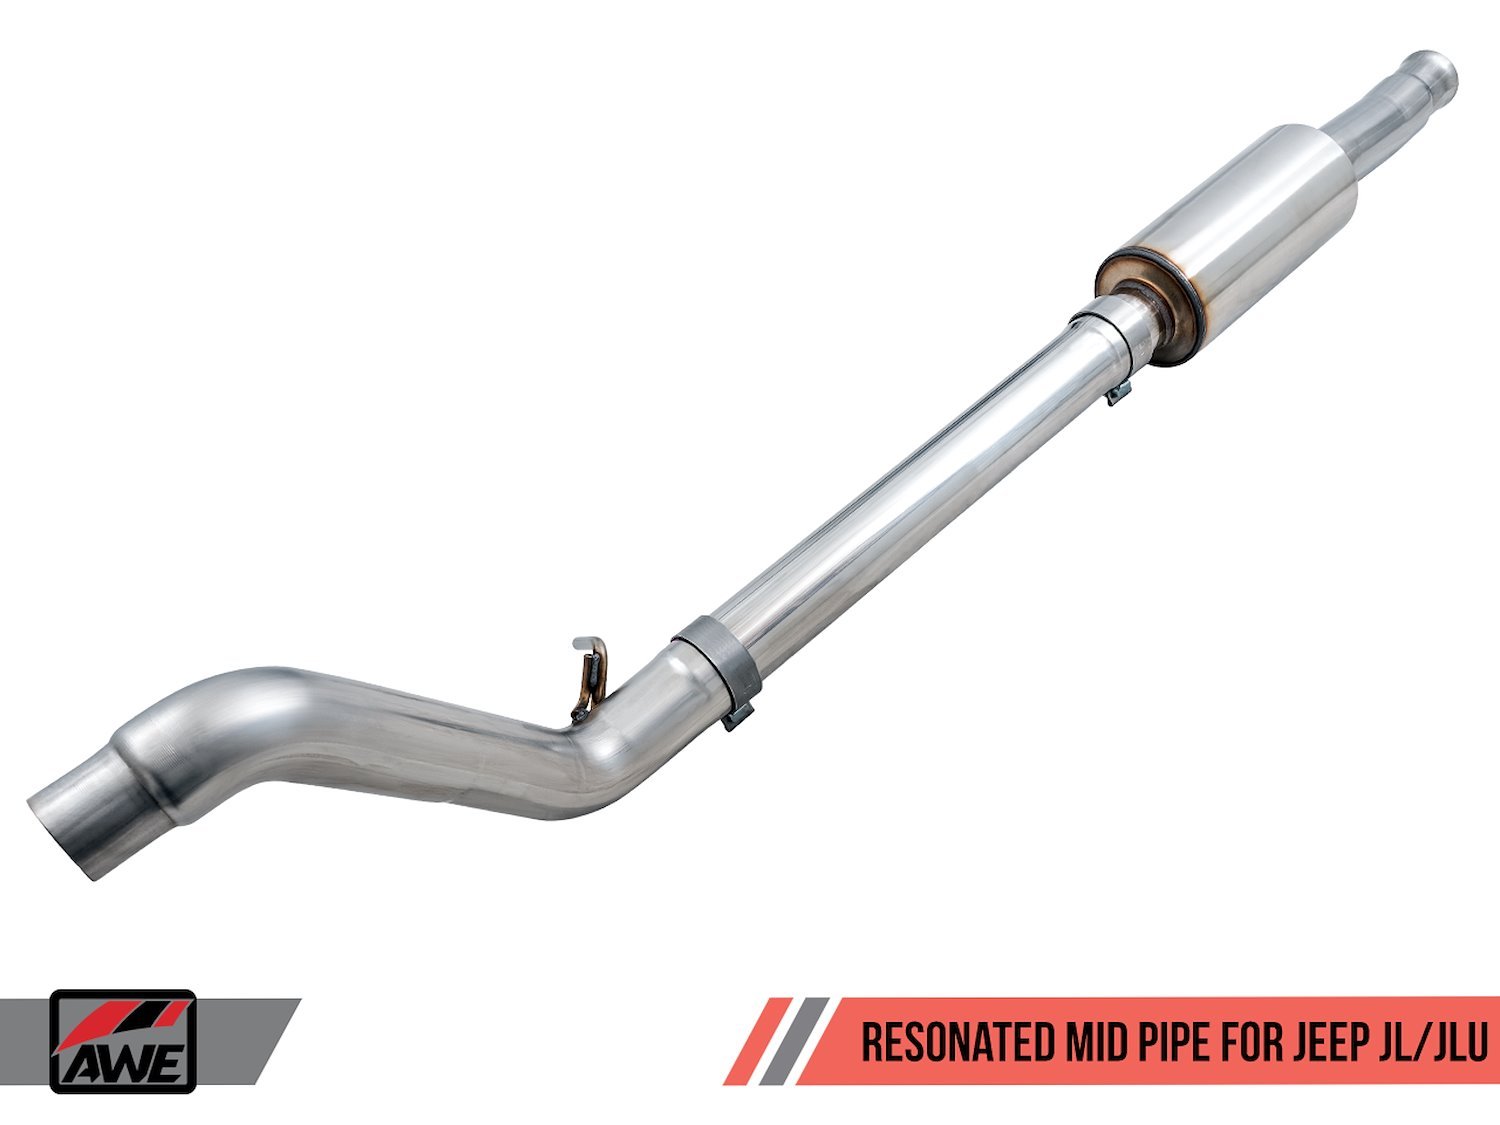 Resonated Mid Pipe for Jeep JL/JLU 2.0T